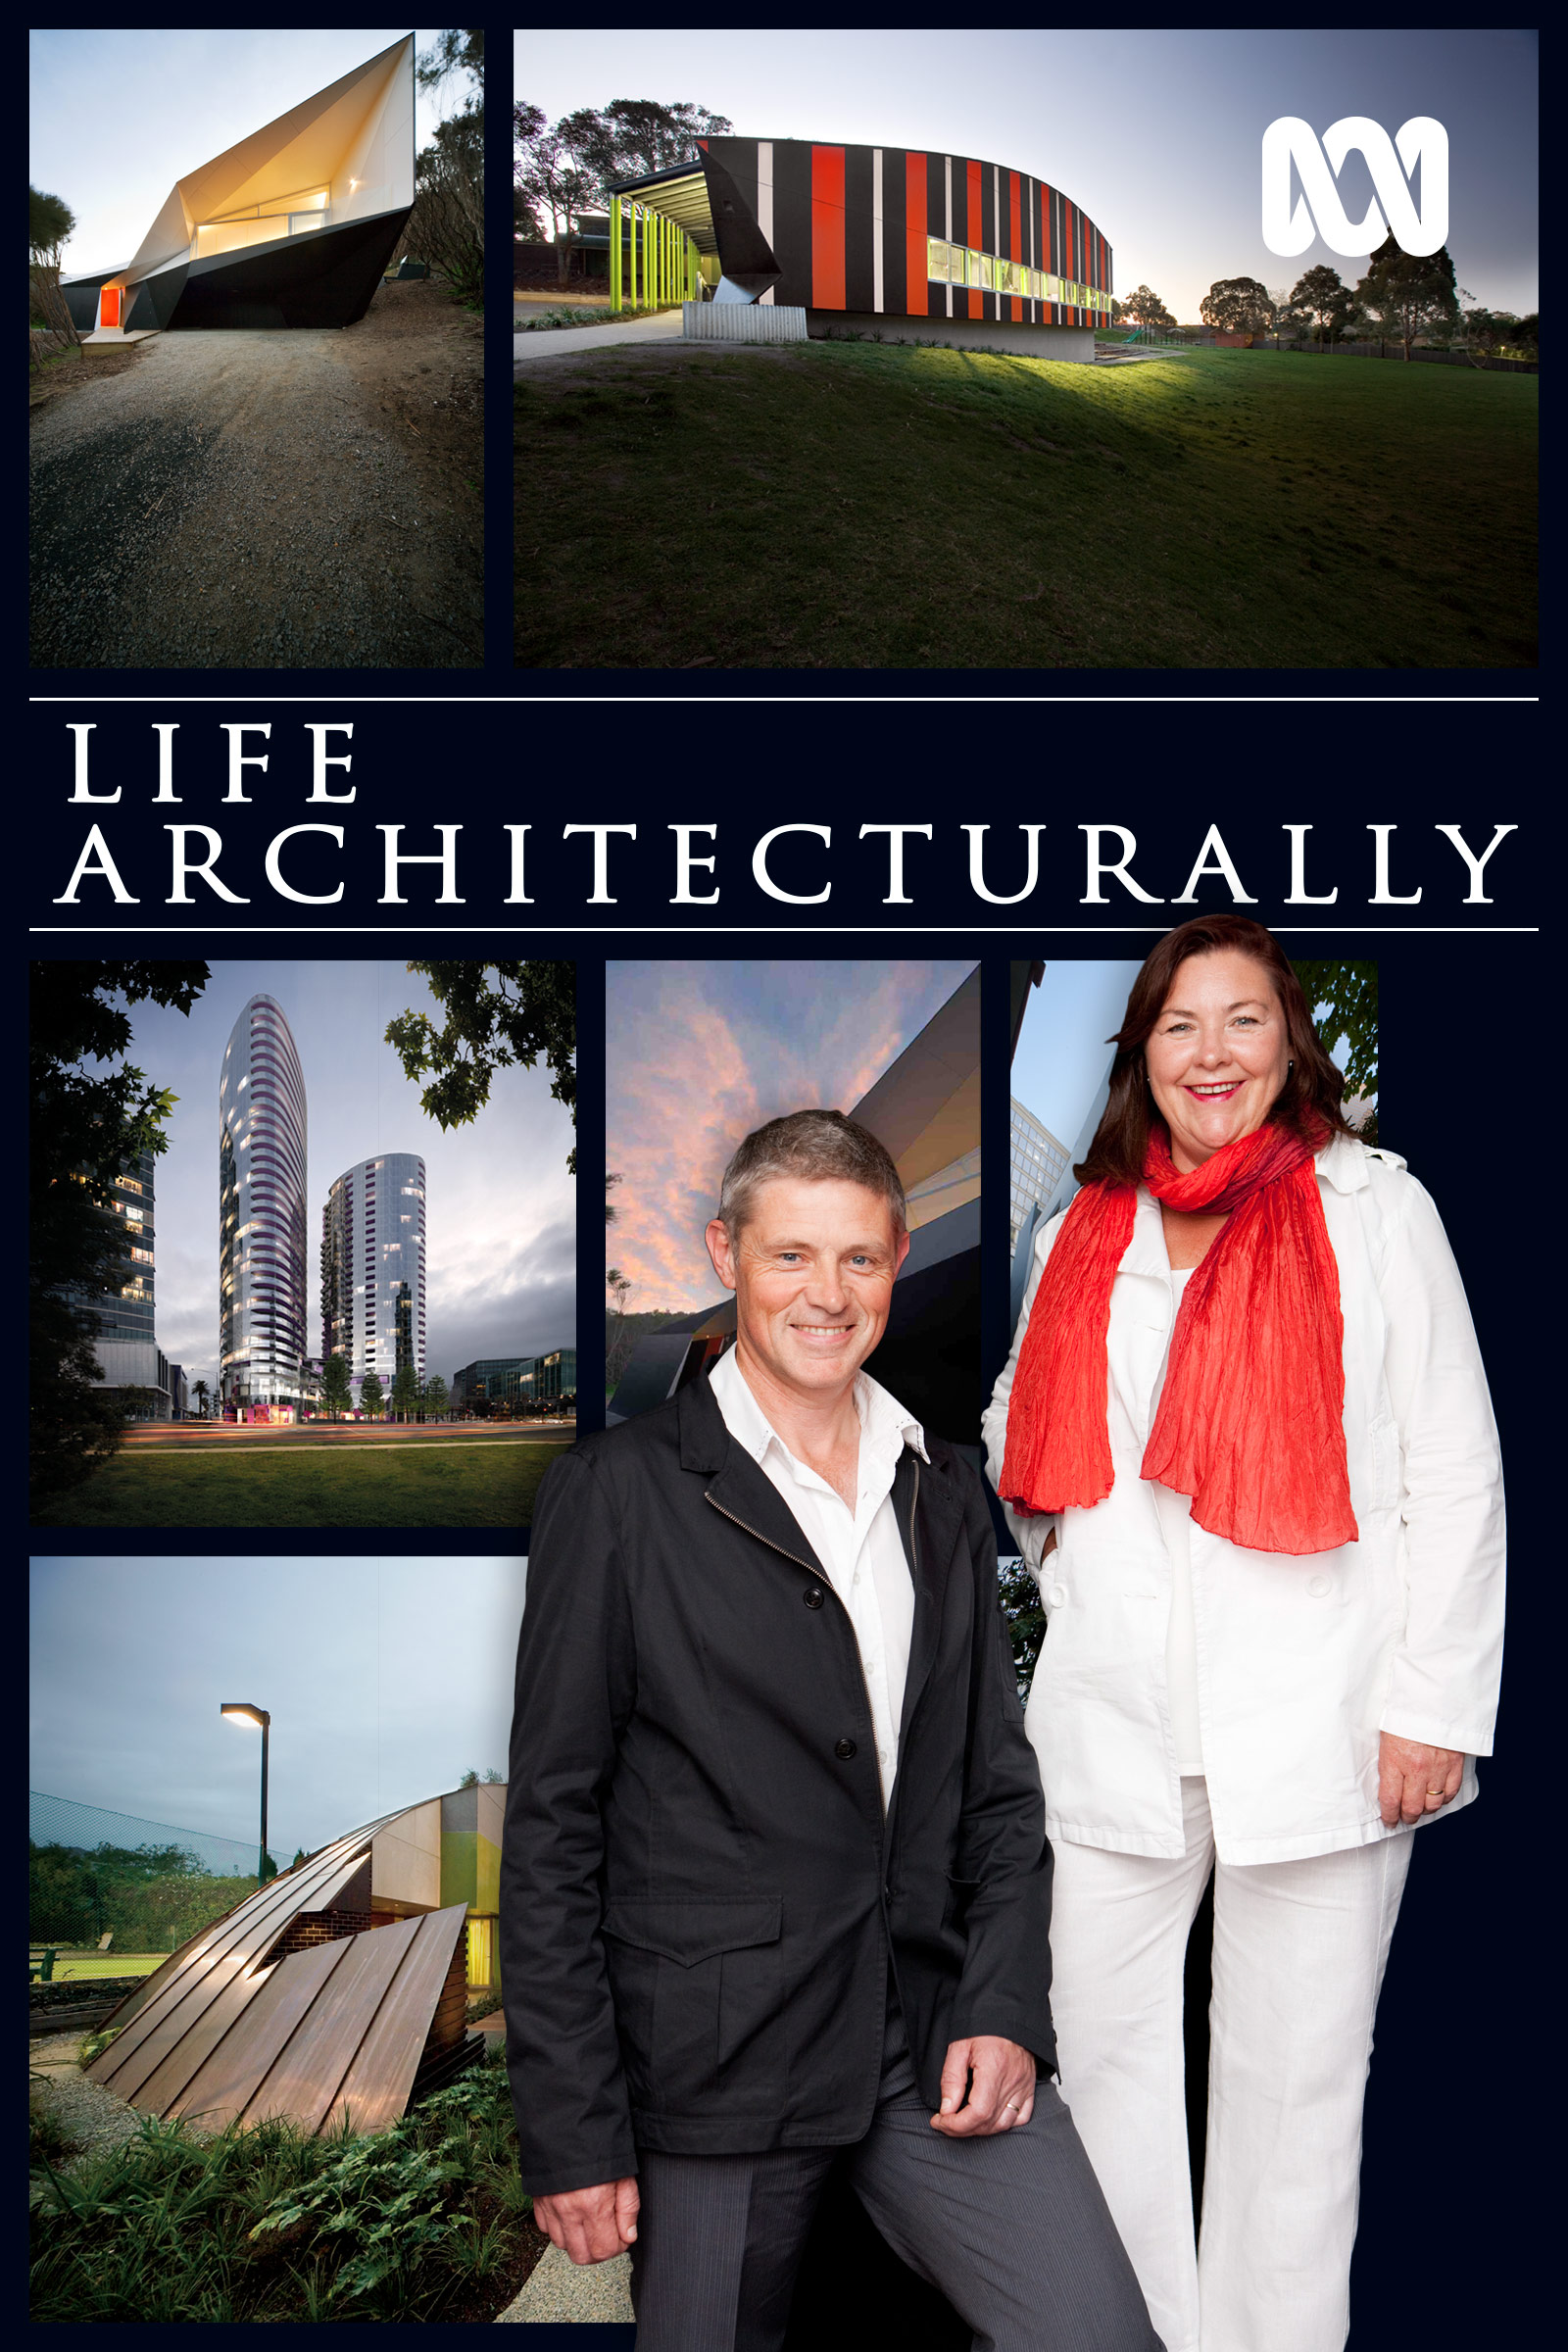 Where to stream Life Architecturally